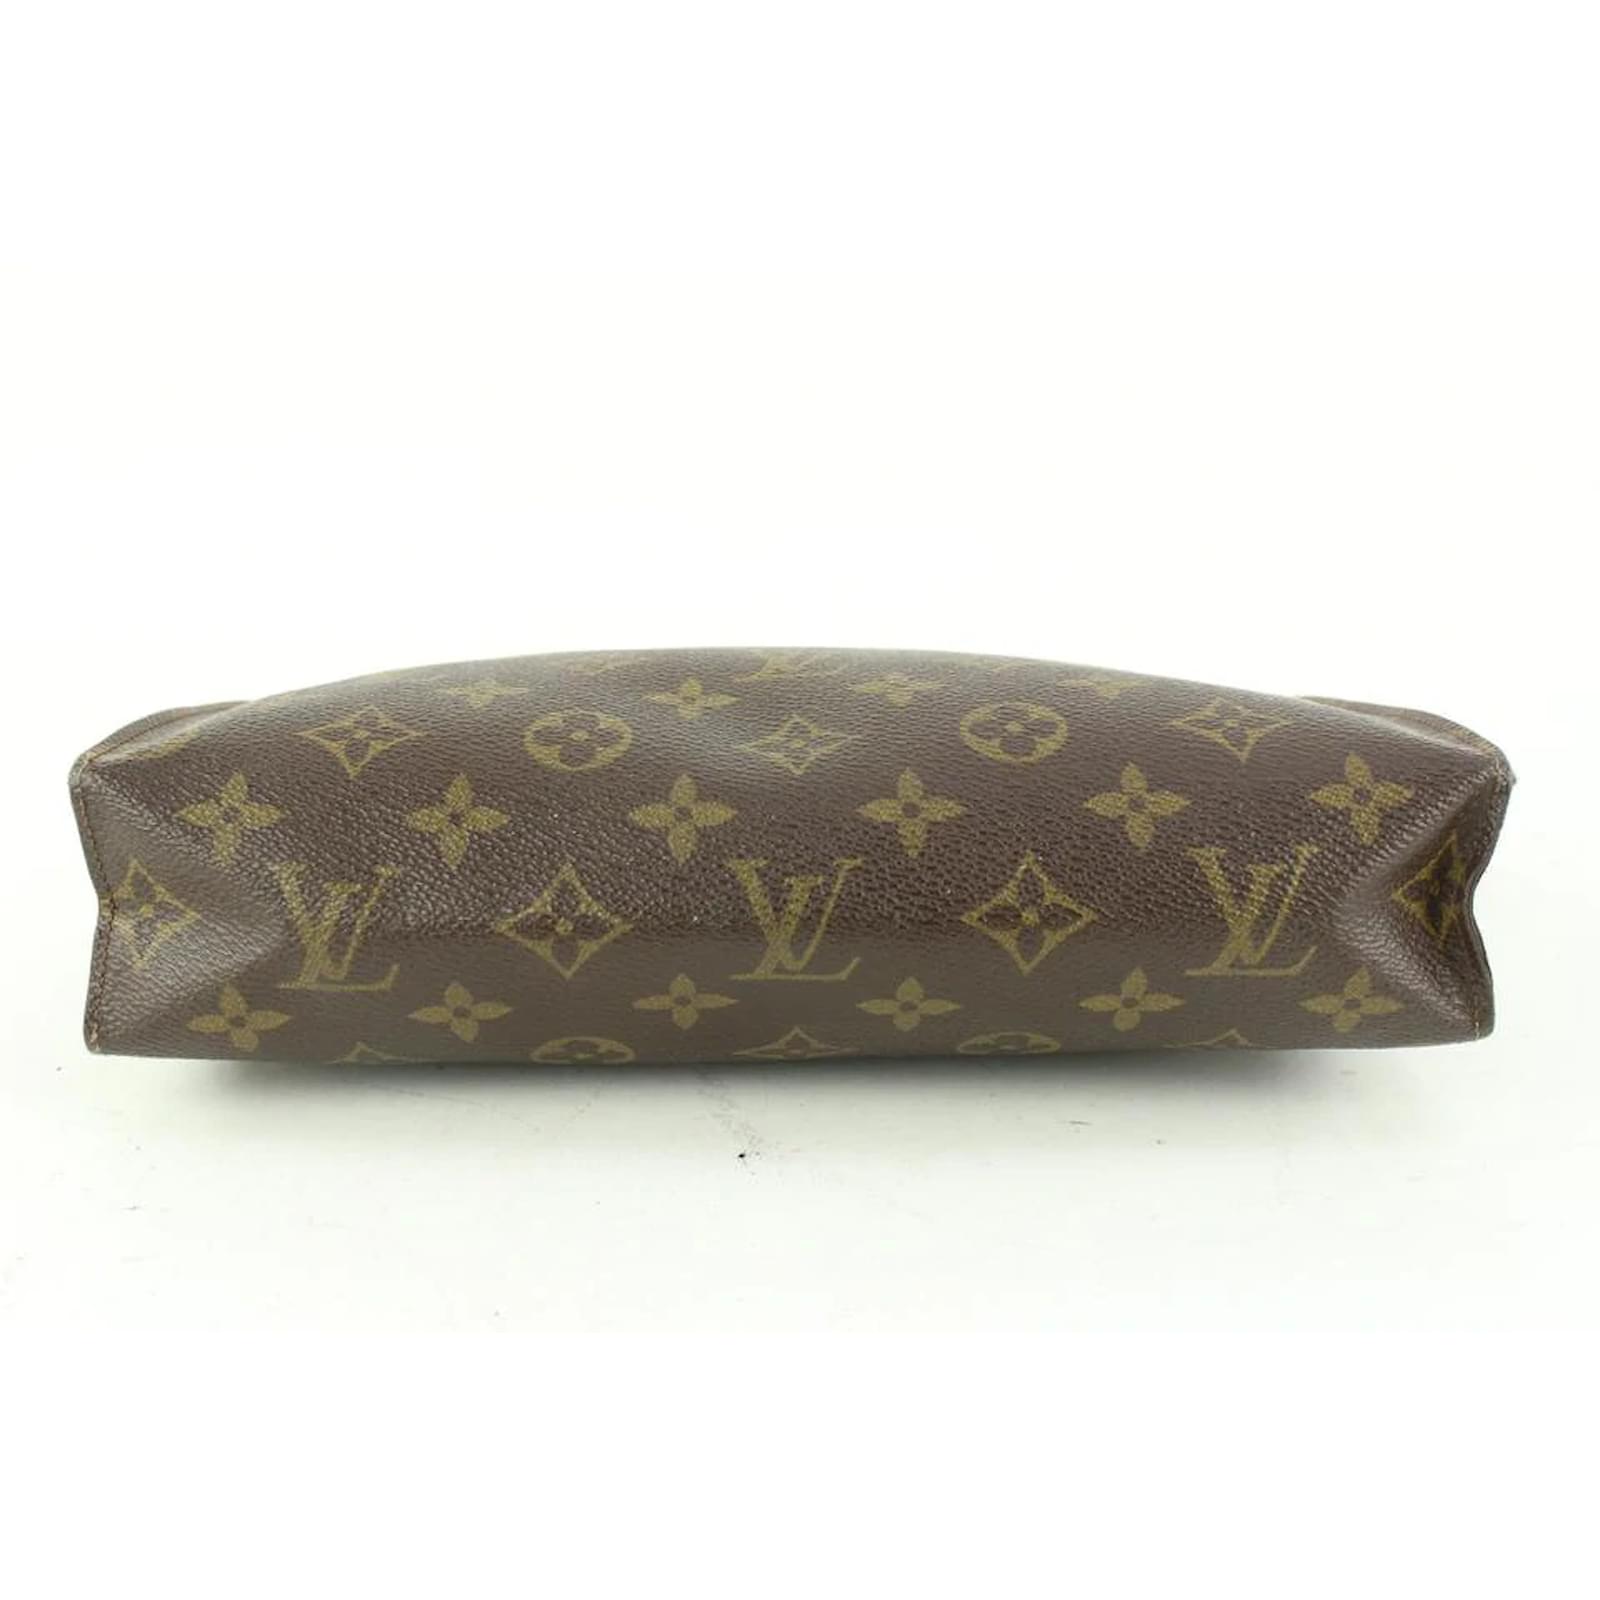 Louis Vuitton, Bags, Brand New Discontinued Lv Toiletry 26